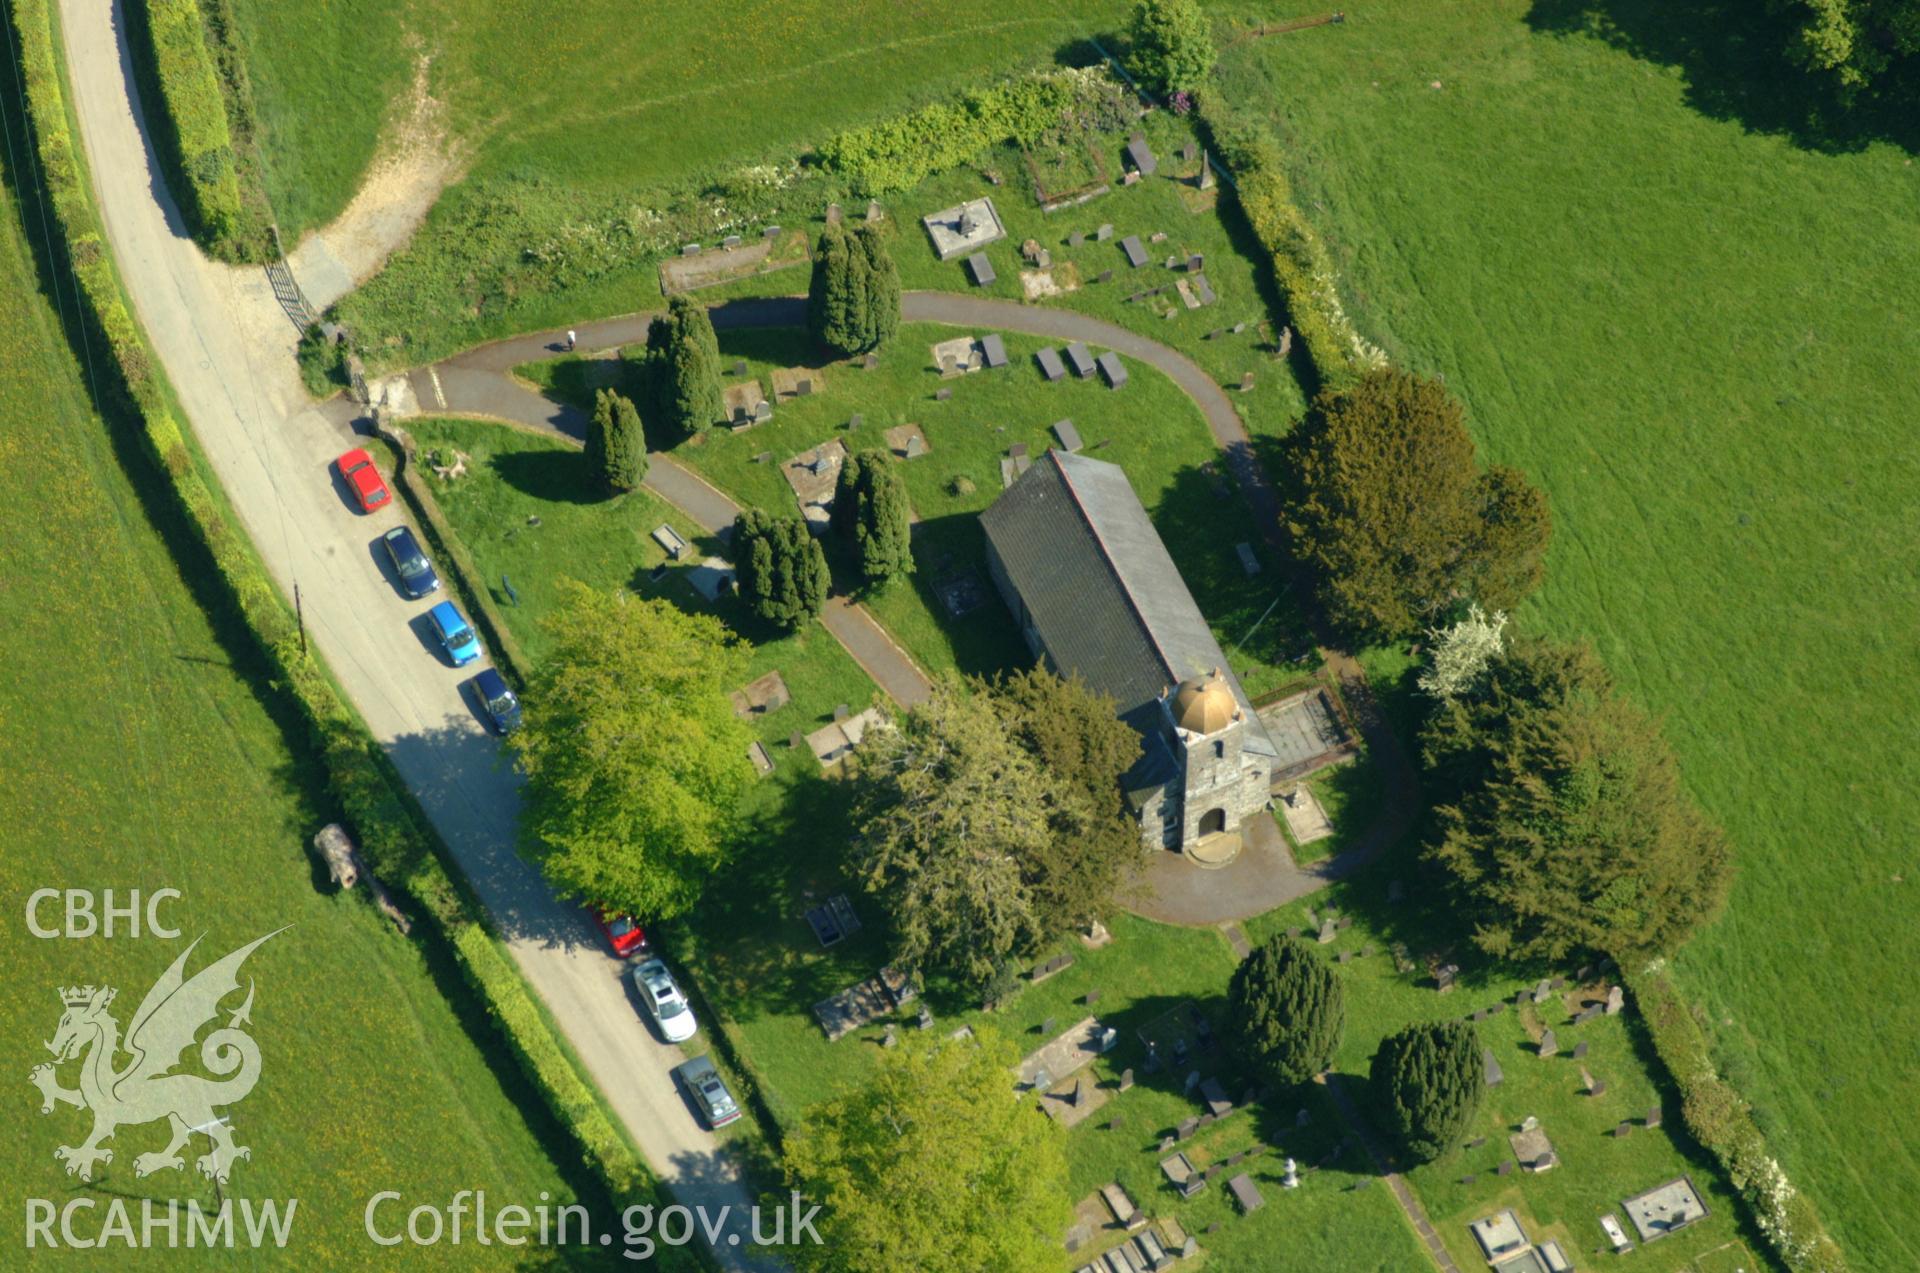 RCAHMW colour oblique aerial photograph of St non's, Llanaeron taken on 24/05/2004 by Toby Driver